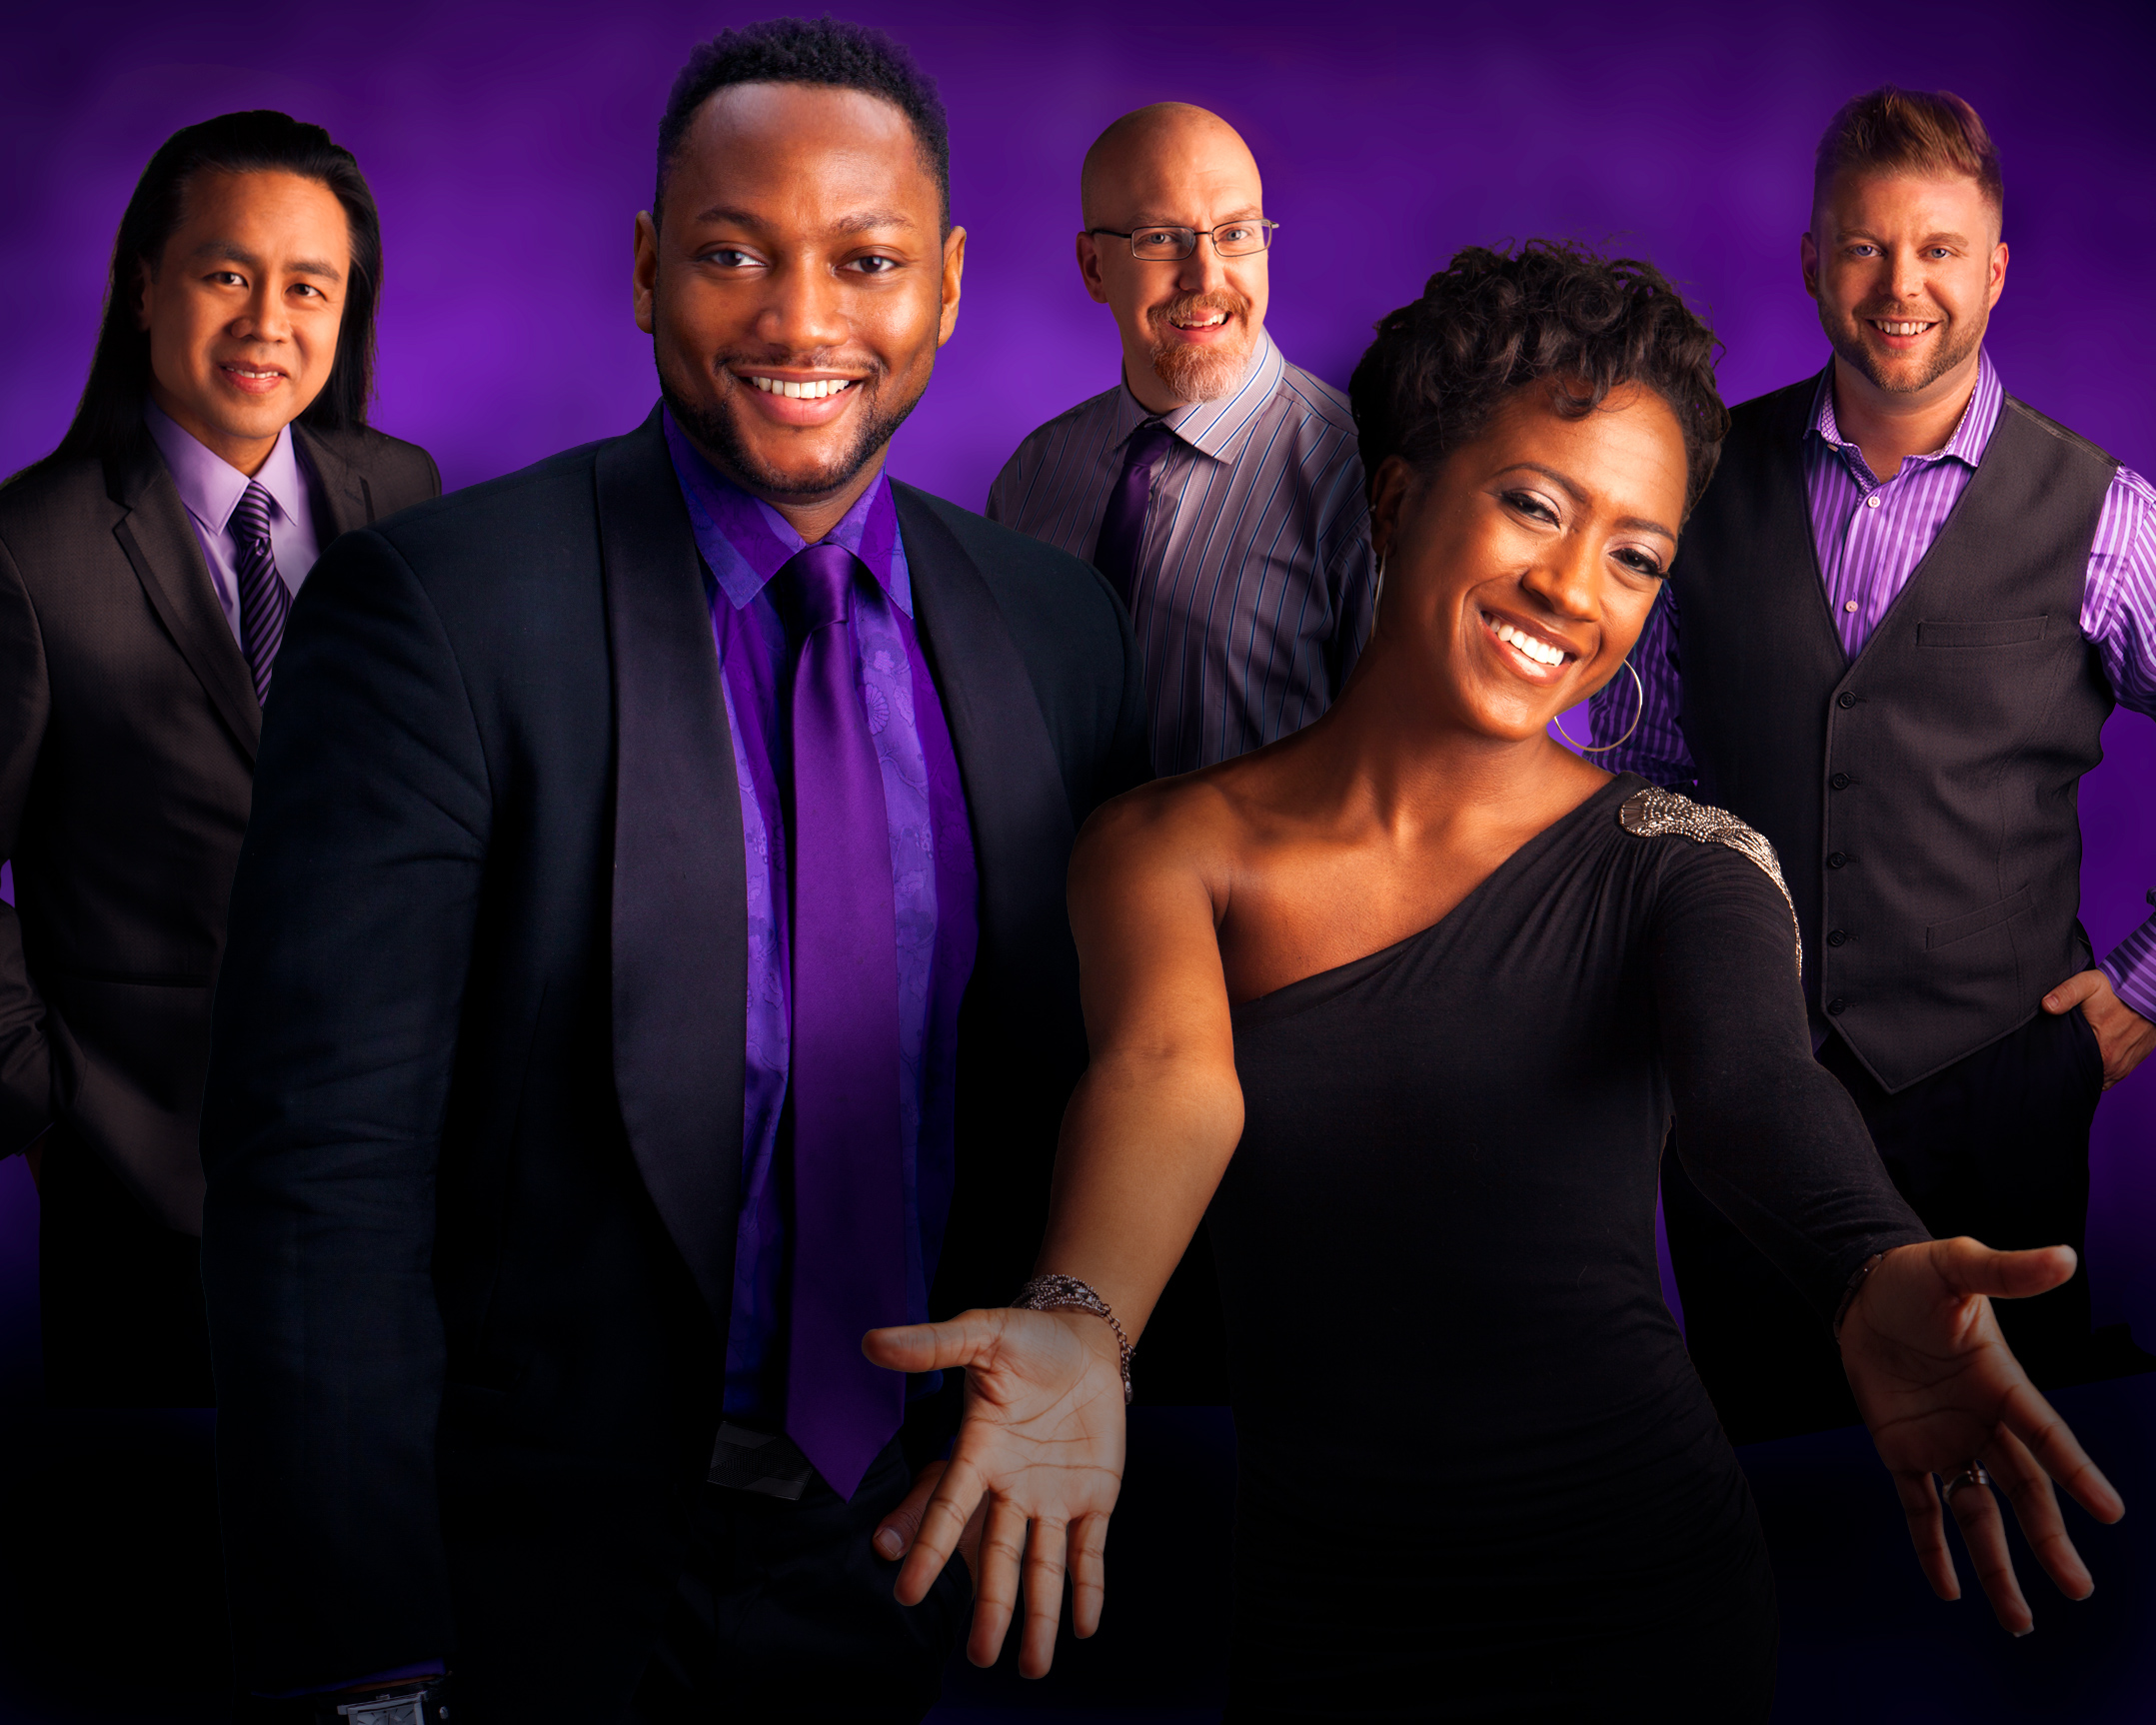 All 5 members of Spoken Four are dressed in purple and standing in front of a purple background.